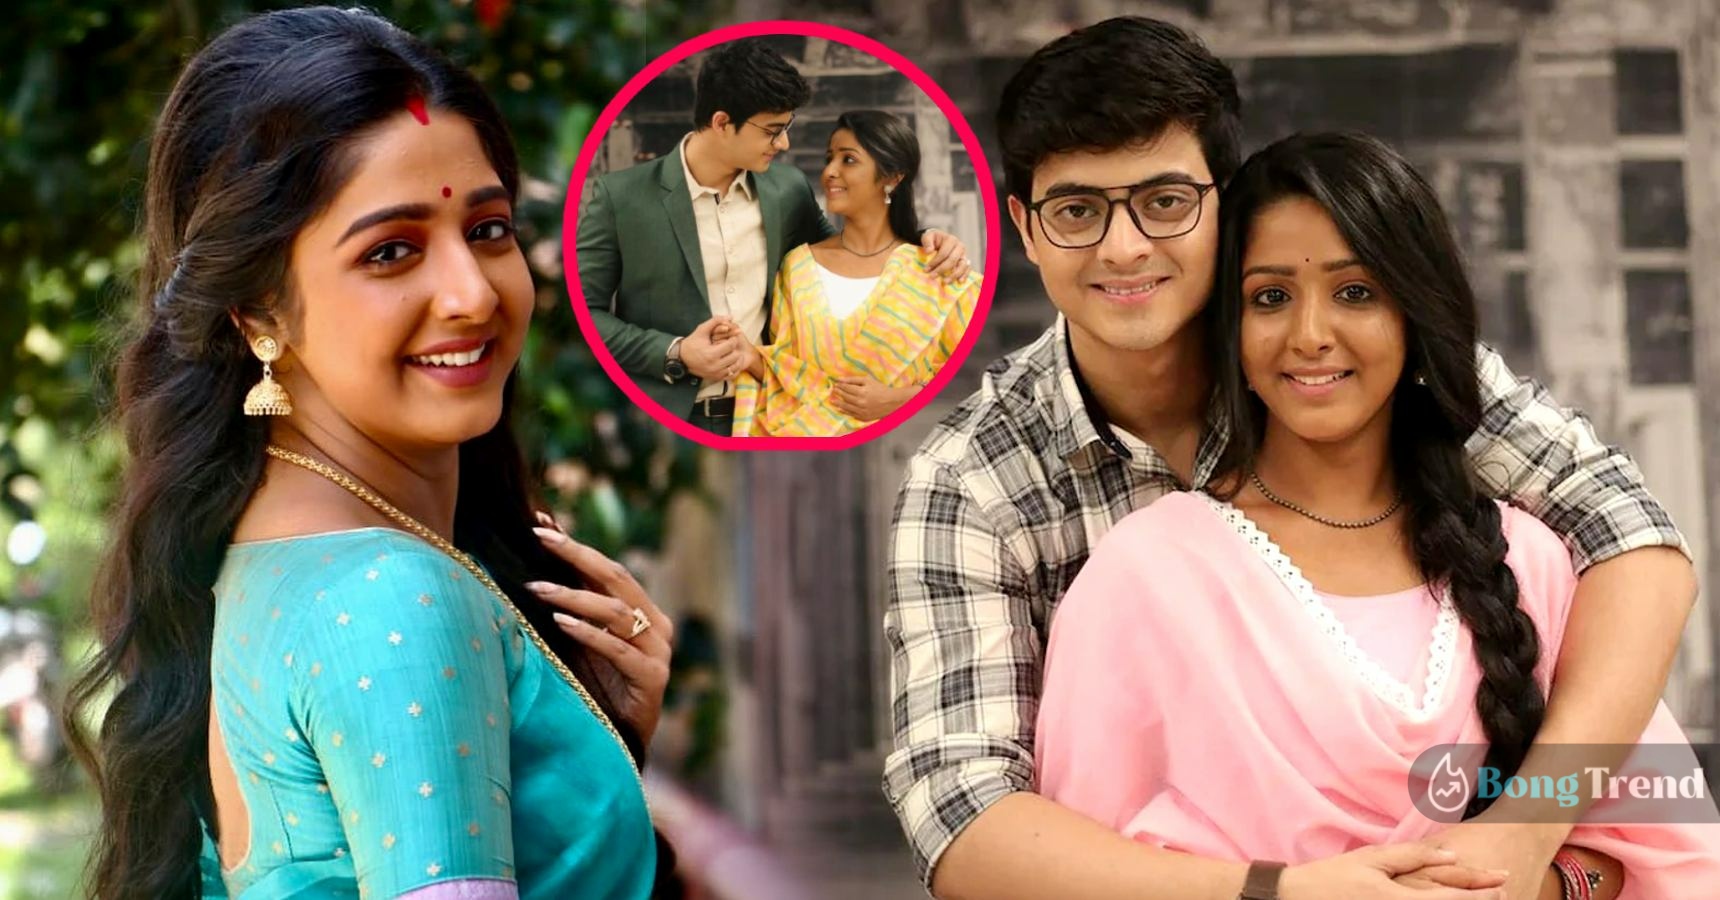 Anurager Chhowa Swastika Ghosh opens up about love relation with Dhrubojyoti Dutta